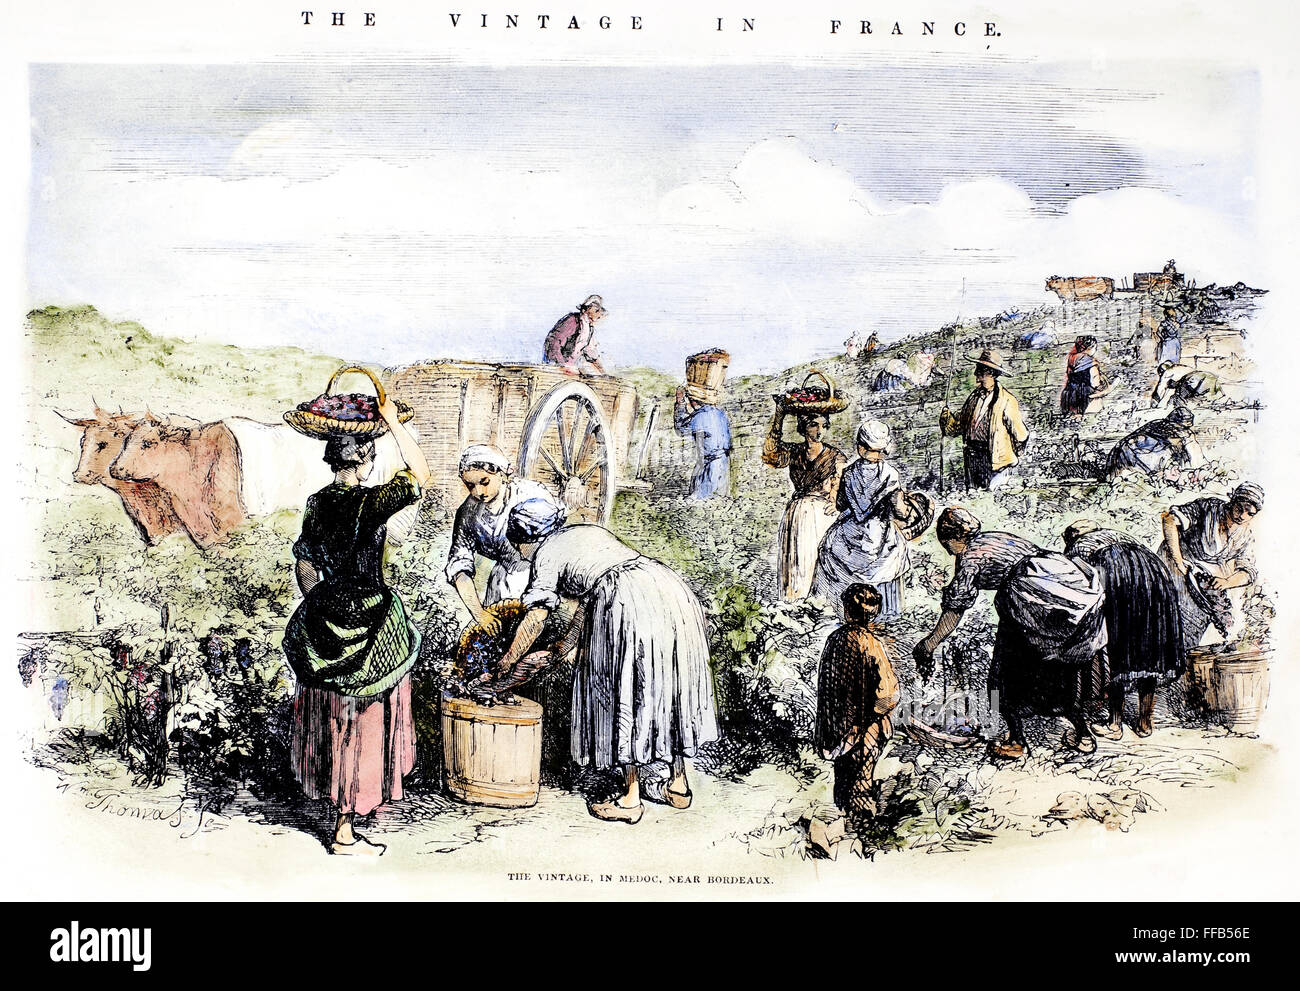 FRANCE: GRAPE HARVEST, 1854. /nHarvesting grapes in Medoc, in the Bordeaux region of France. Wood engraving, English, 1854. Stock Photo